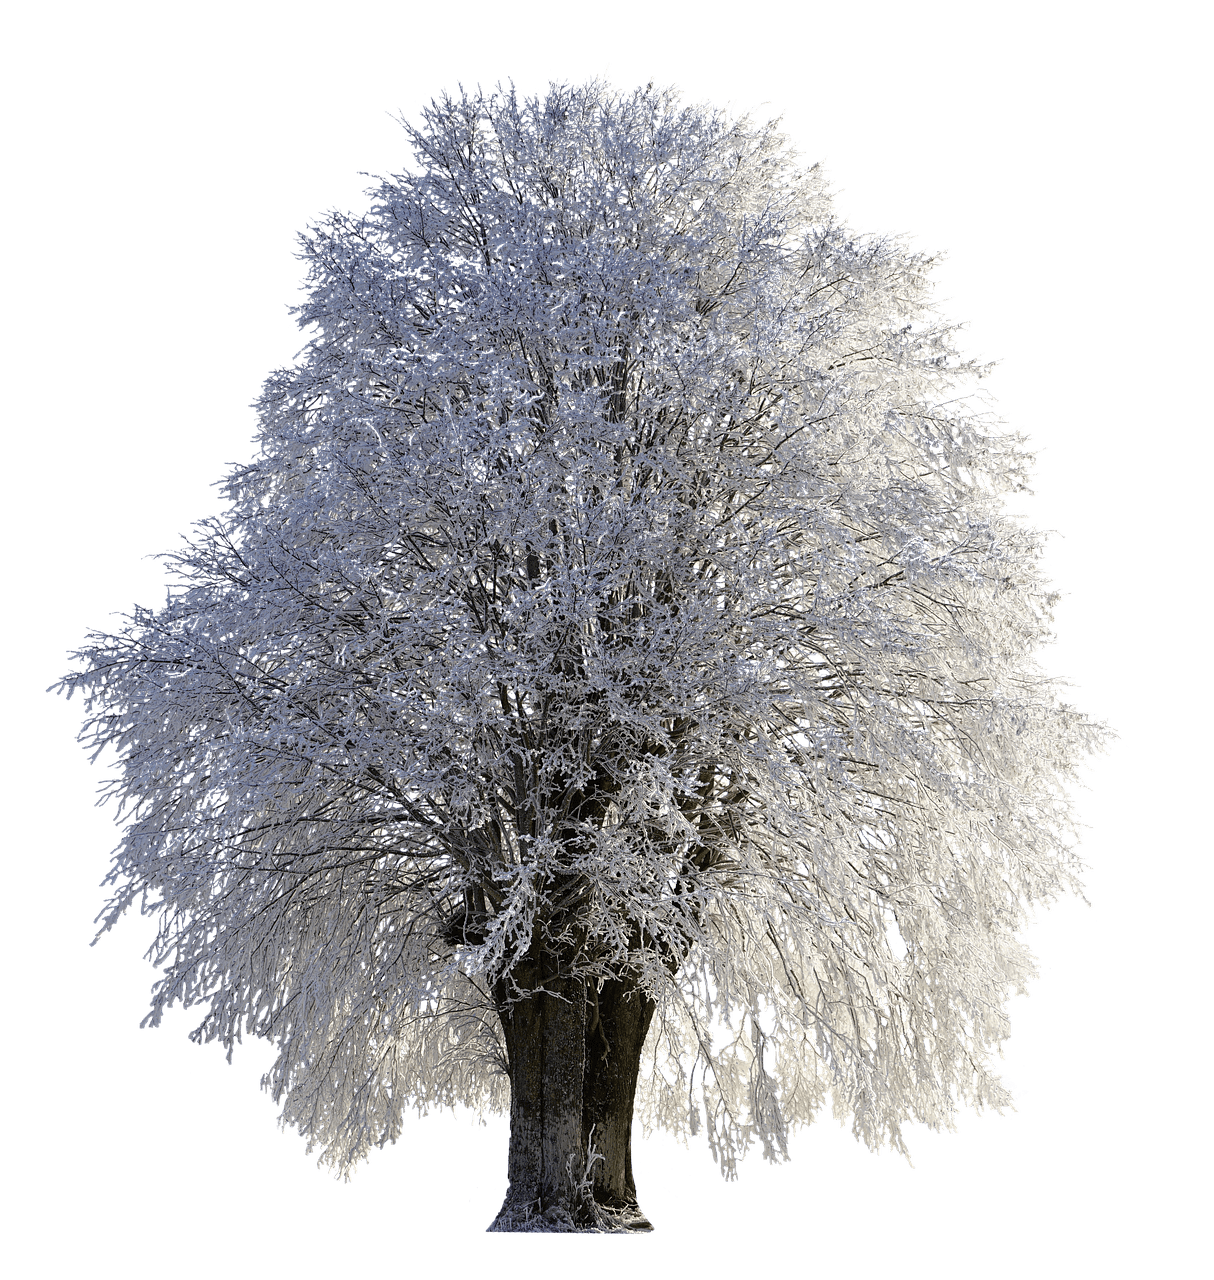 clipart snow frost